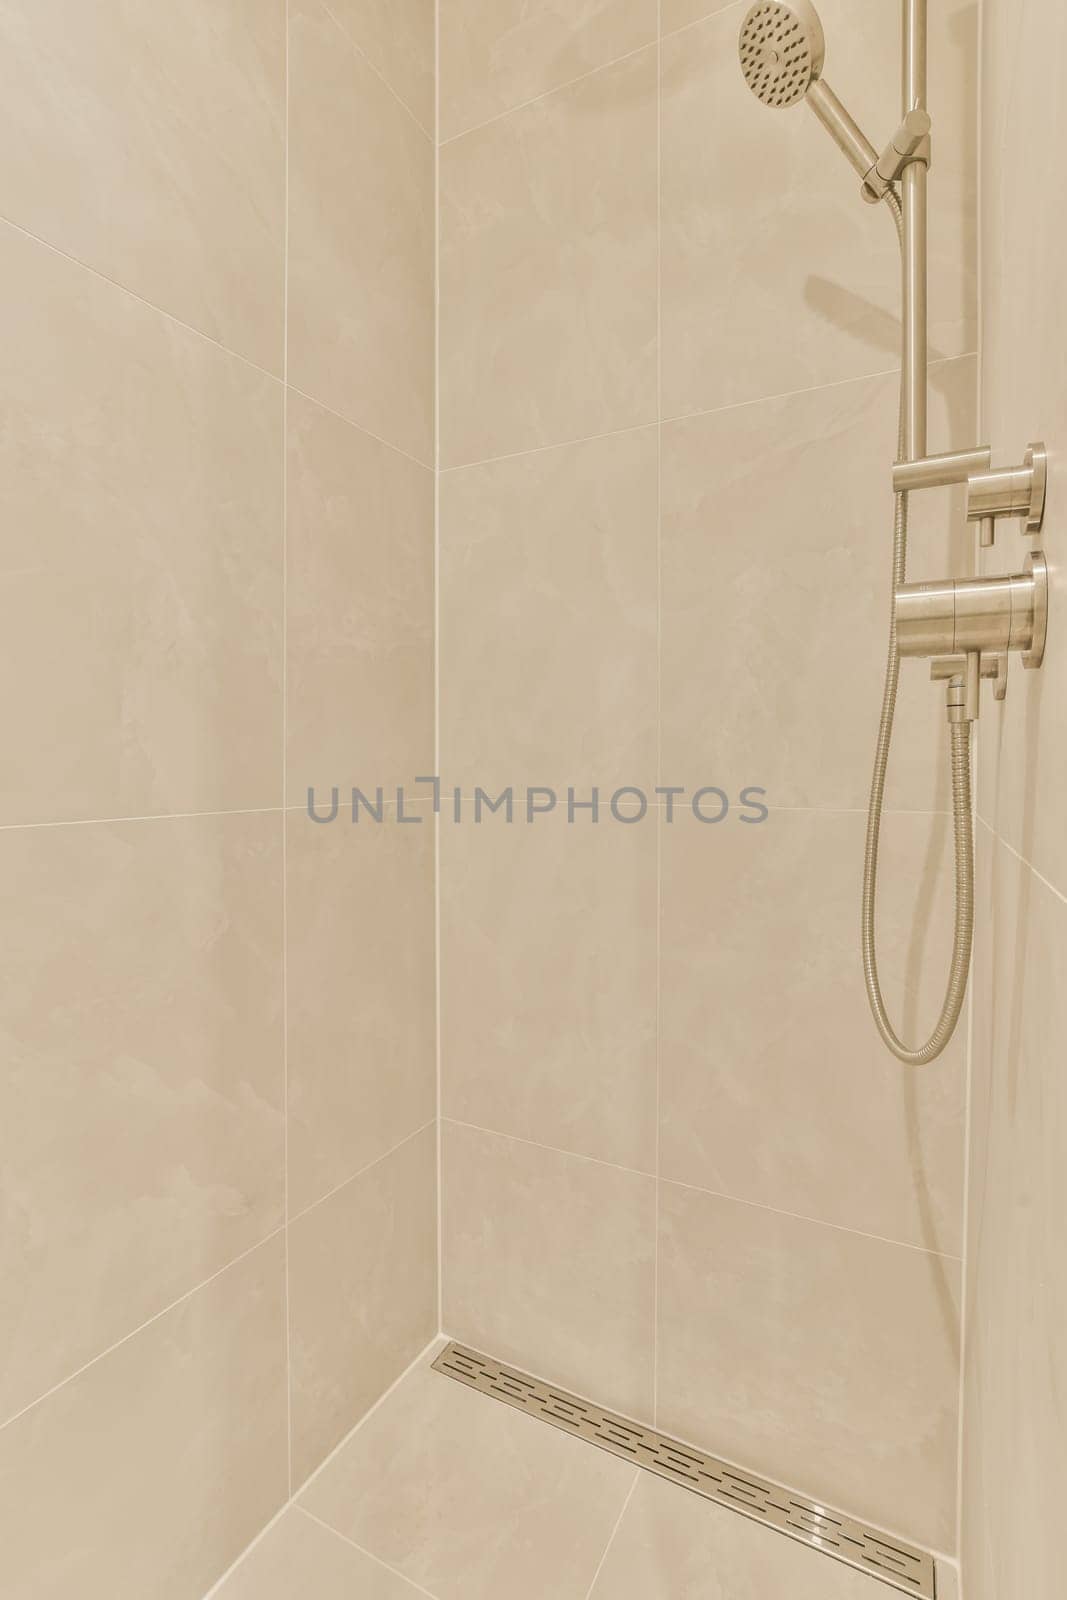 a shower in a white tiled bathroom by casamedia